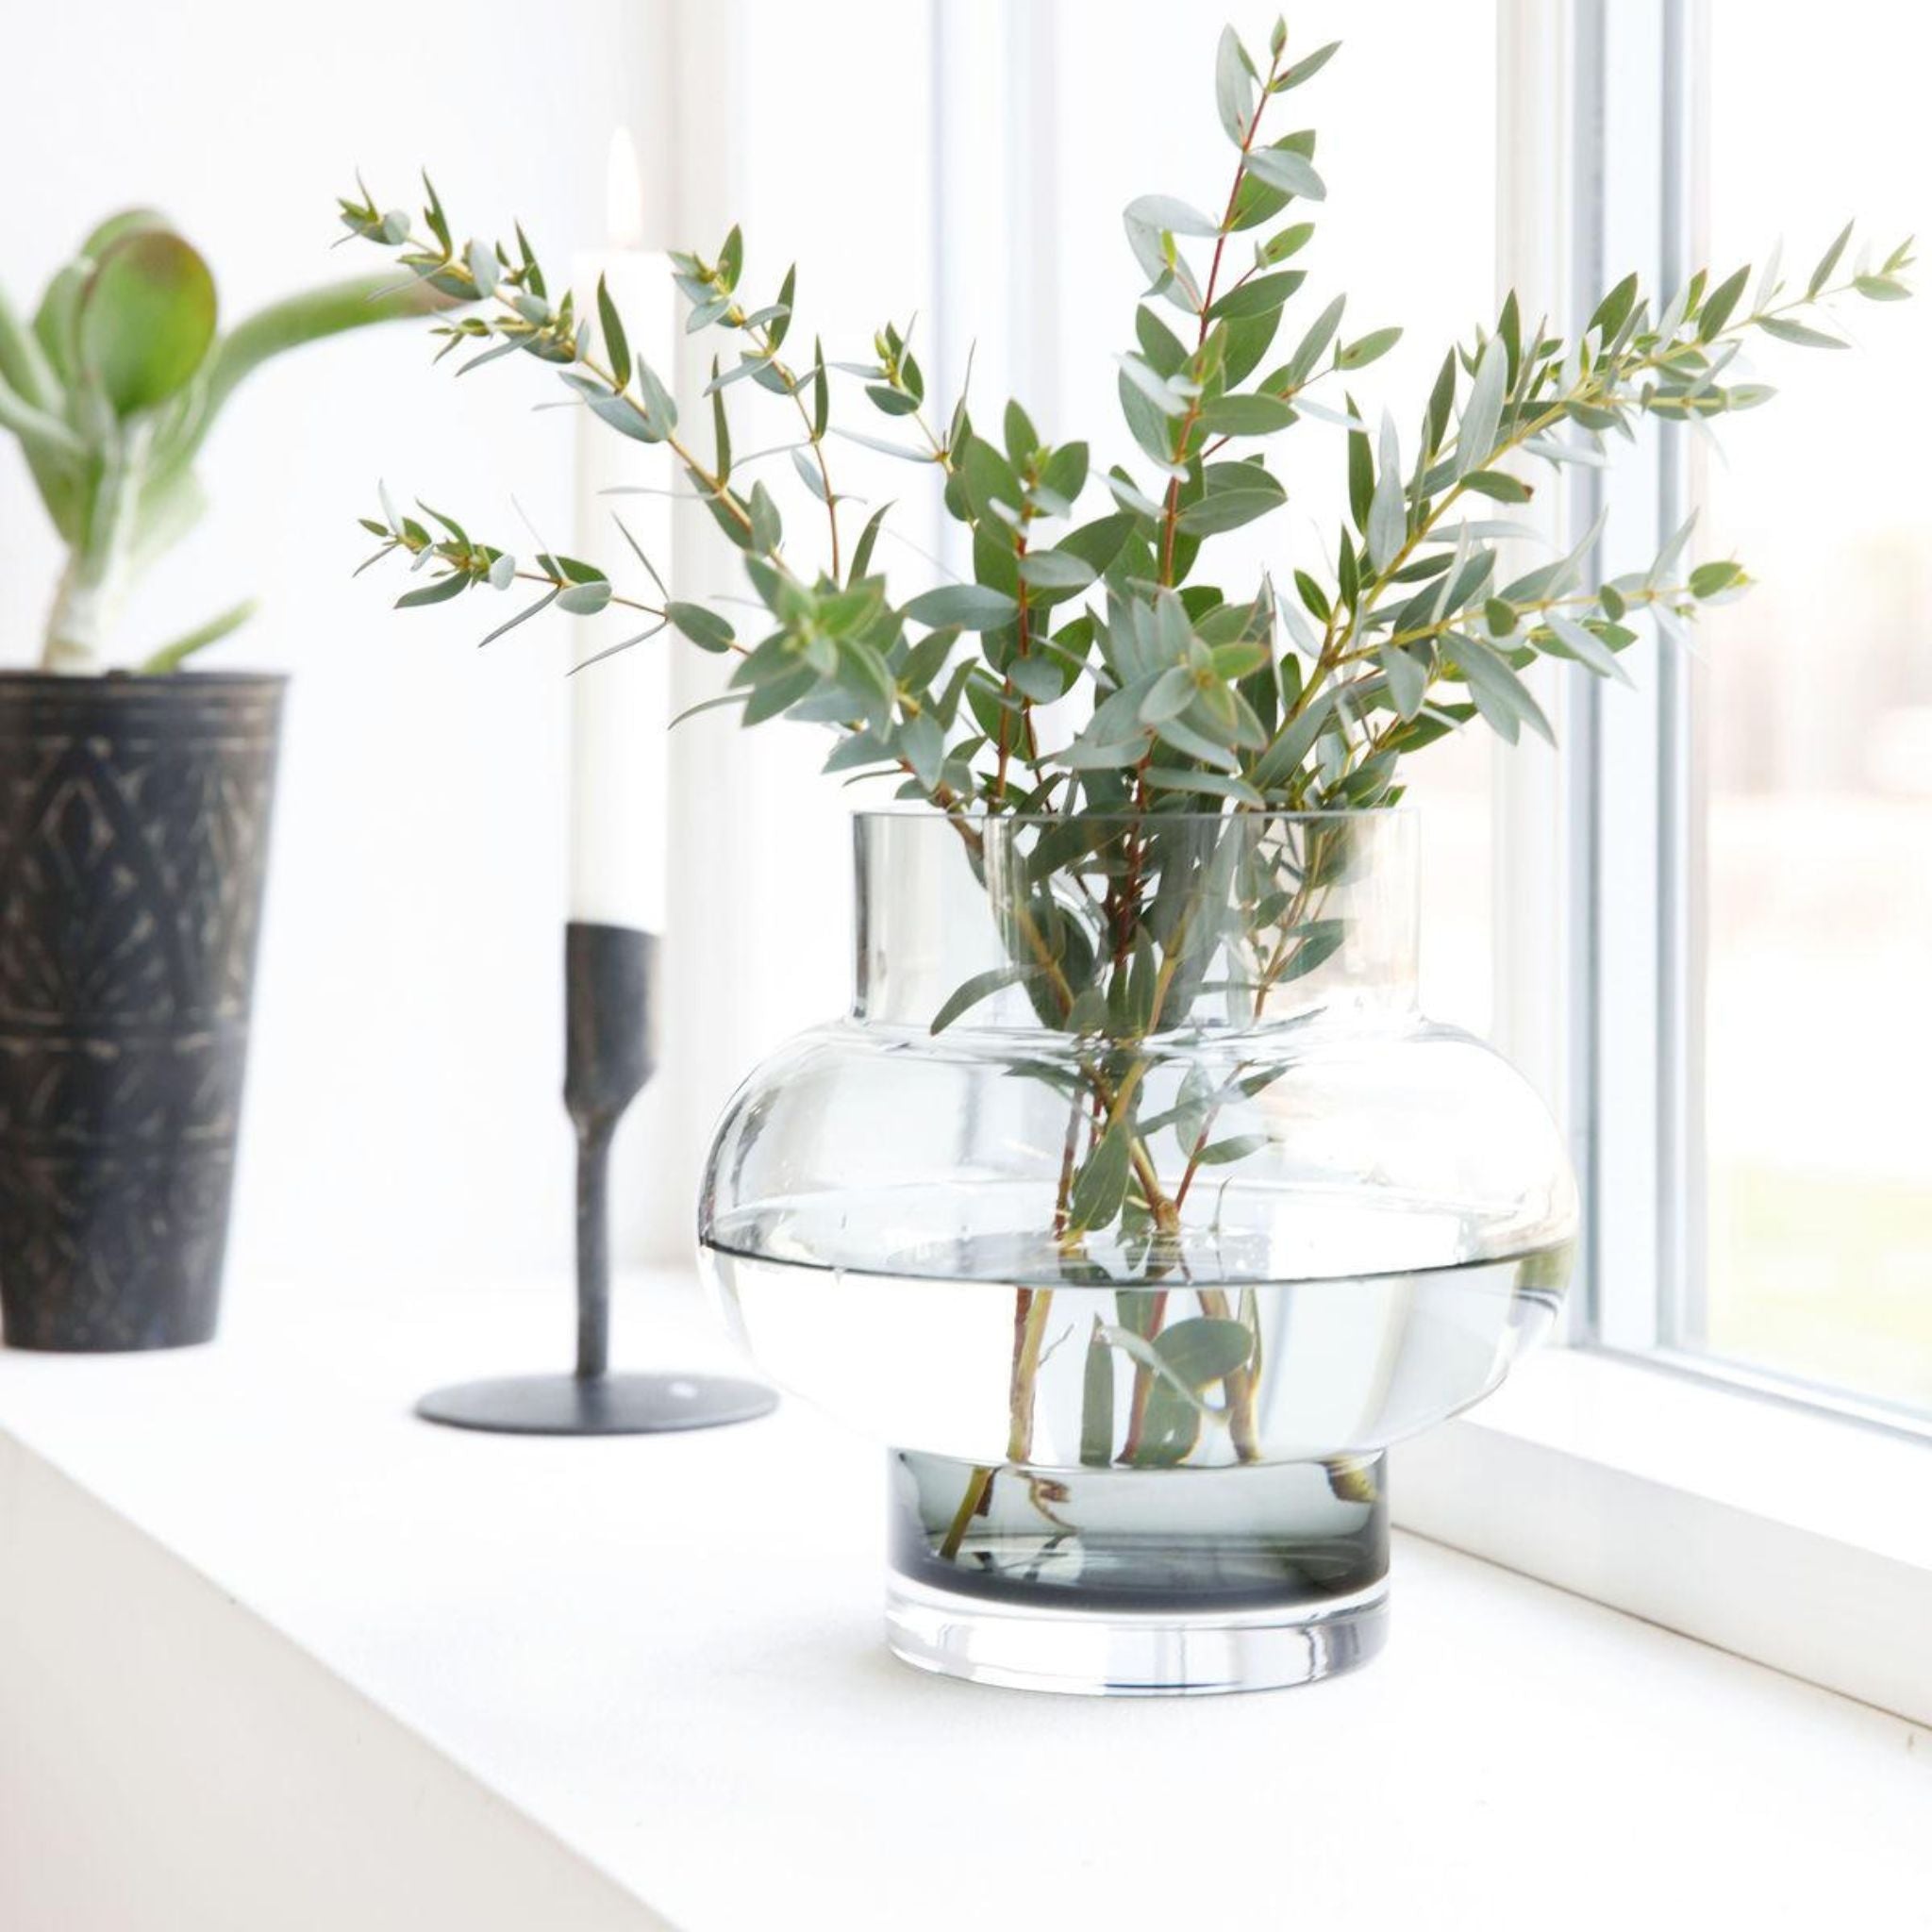 LOW SMOKEY GREY VASE - Simply Elevated Home Furnishings 